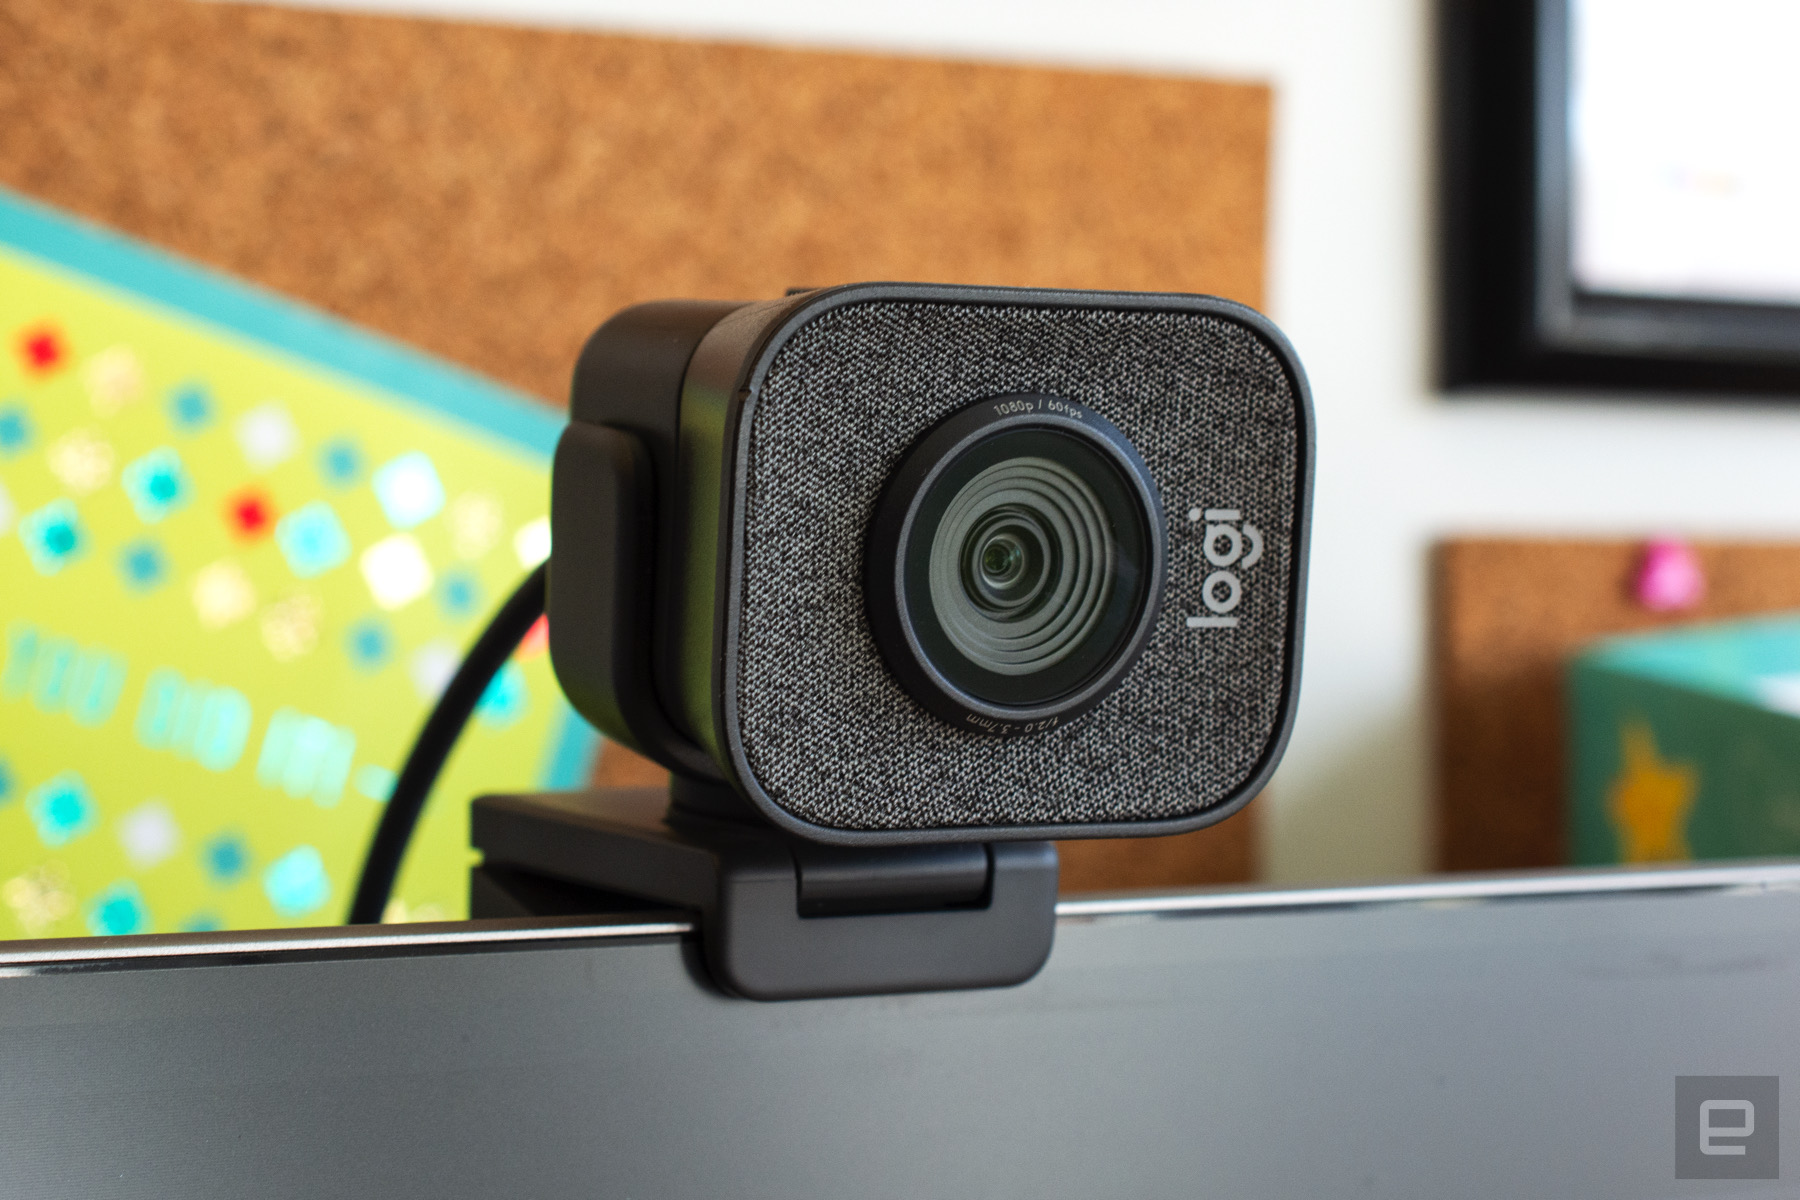 Logitech’s StreamCam is only $100 at Amazon and Best Buy